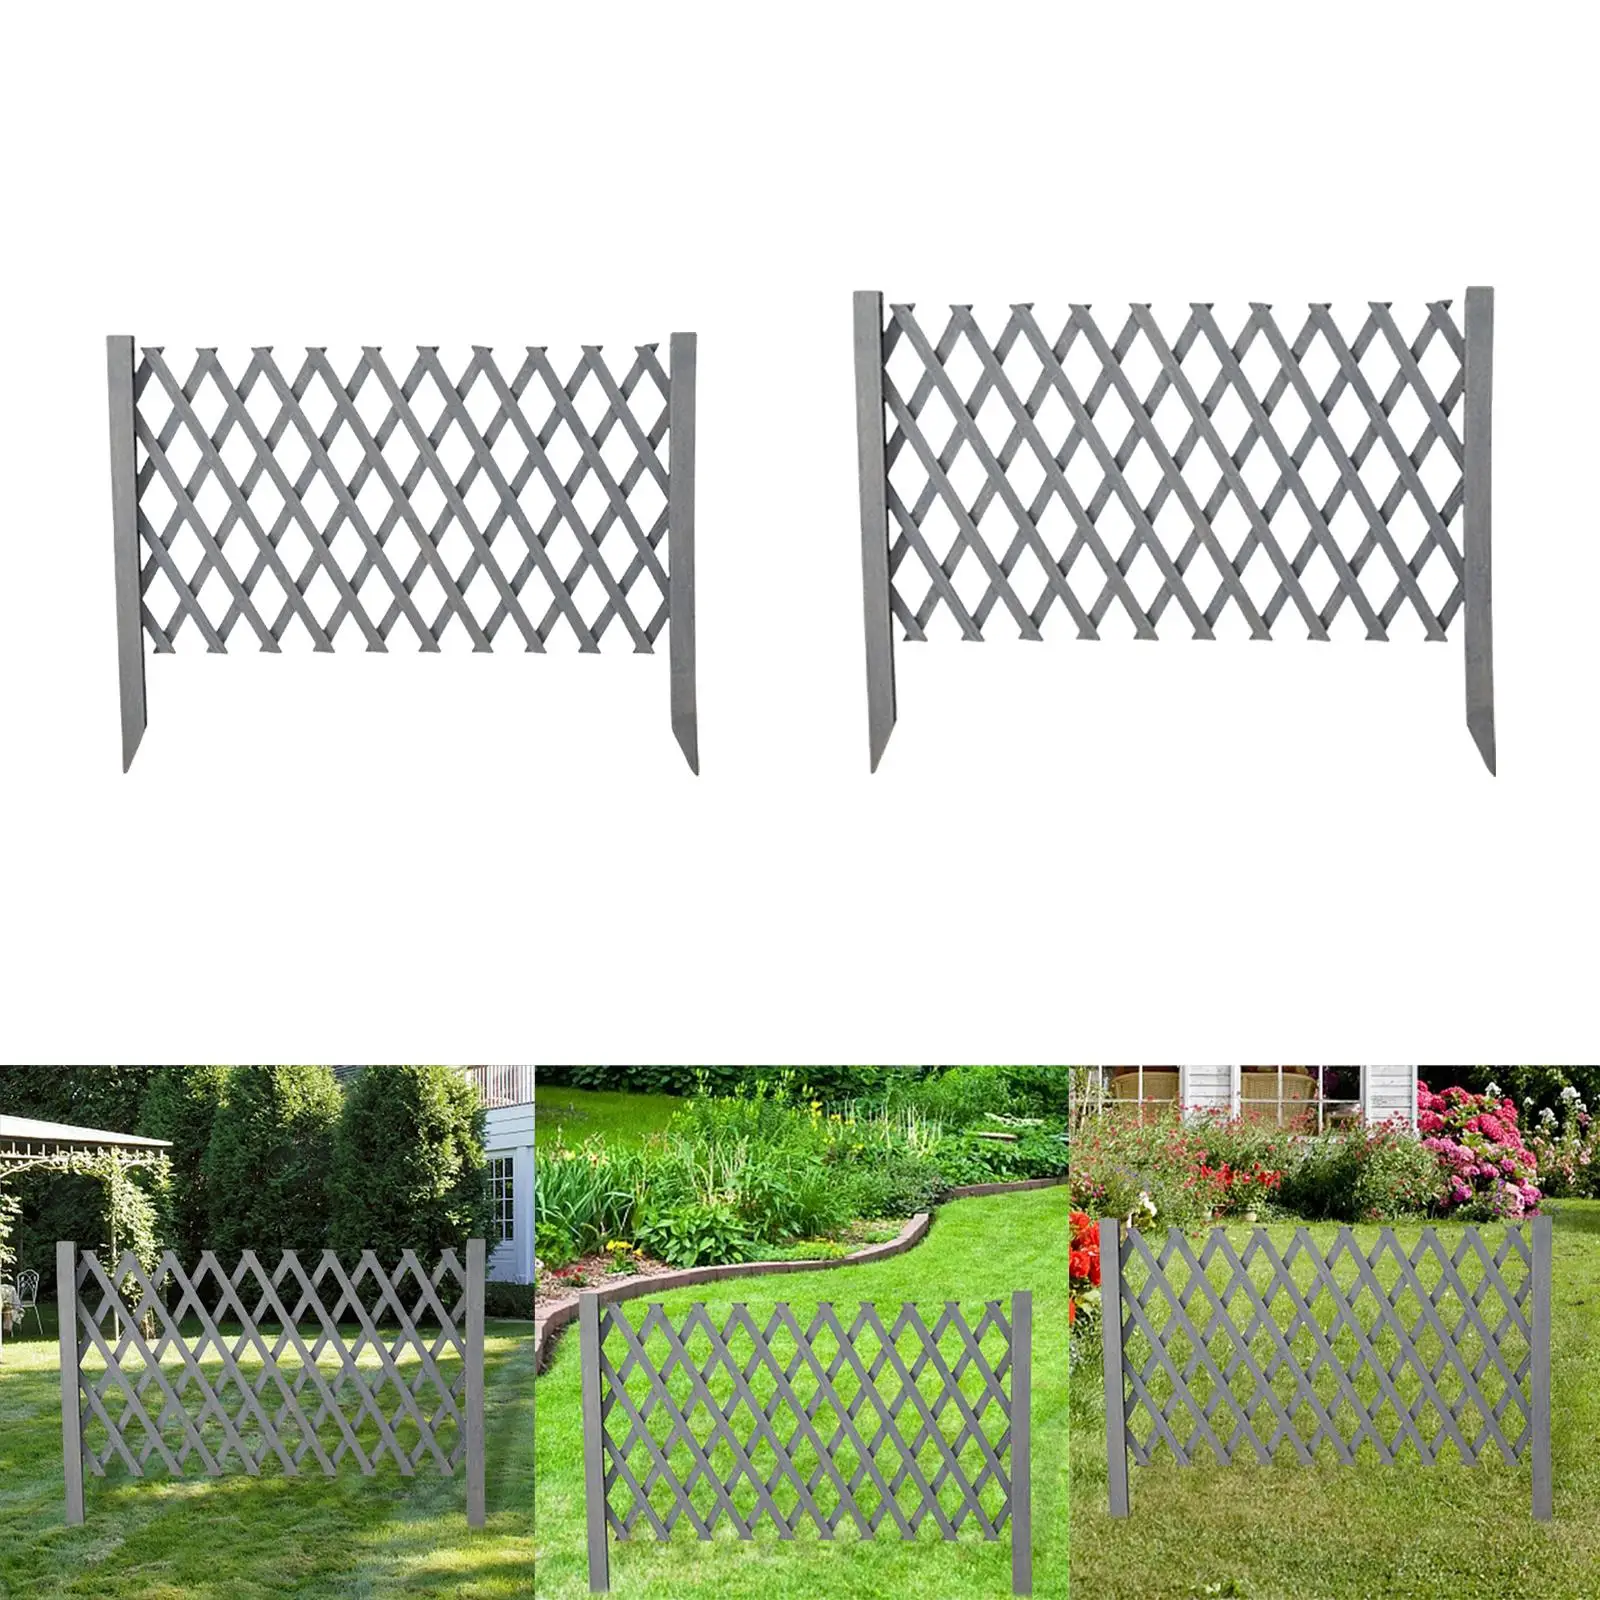 Expandable Wooden Fence Dogs Gate Extendable Instant Fence Freestanding Garden Trellis Fence for Garden Yard Backyard Patio Home